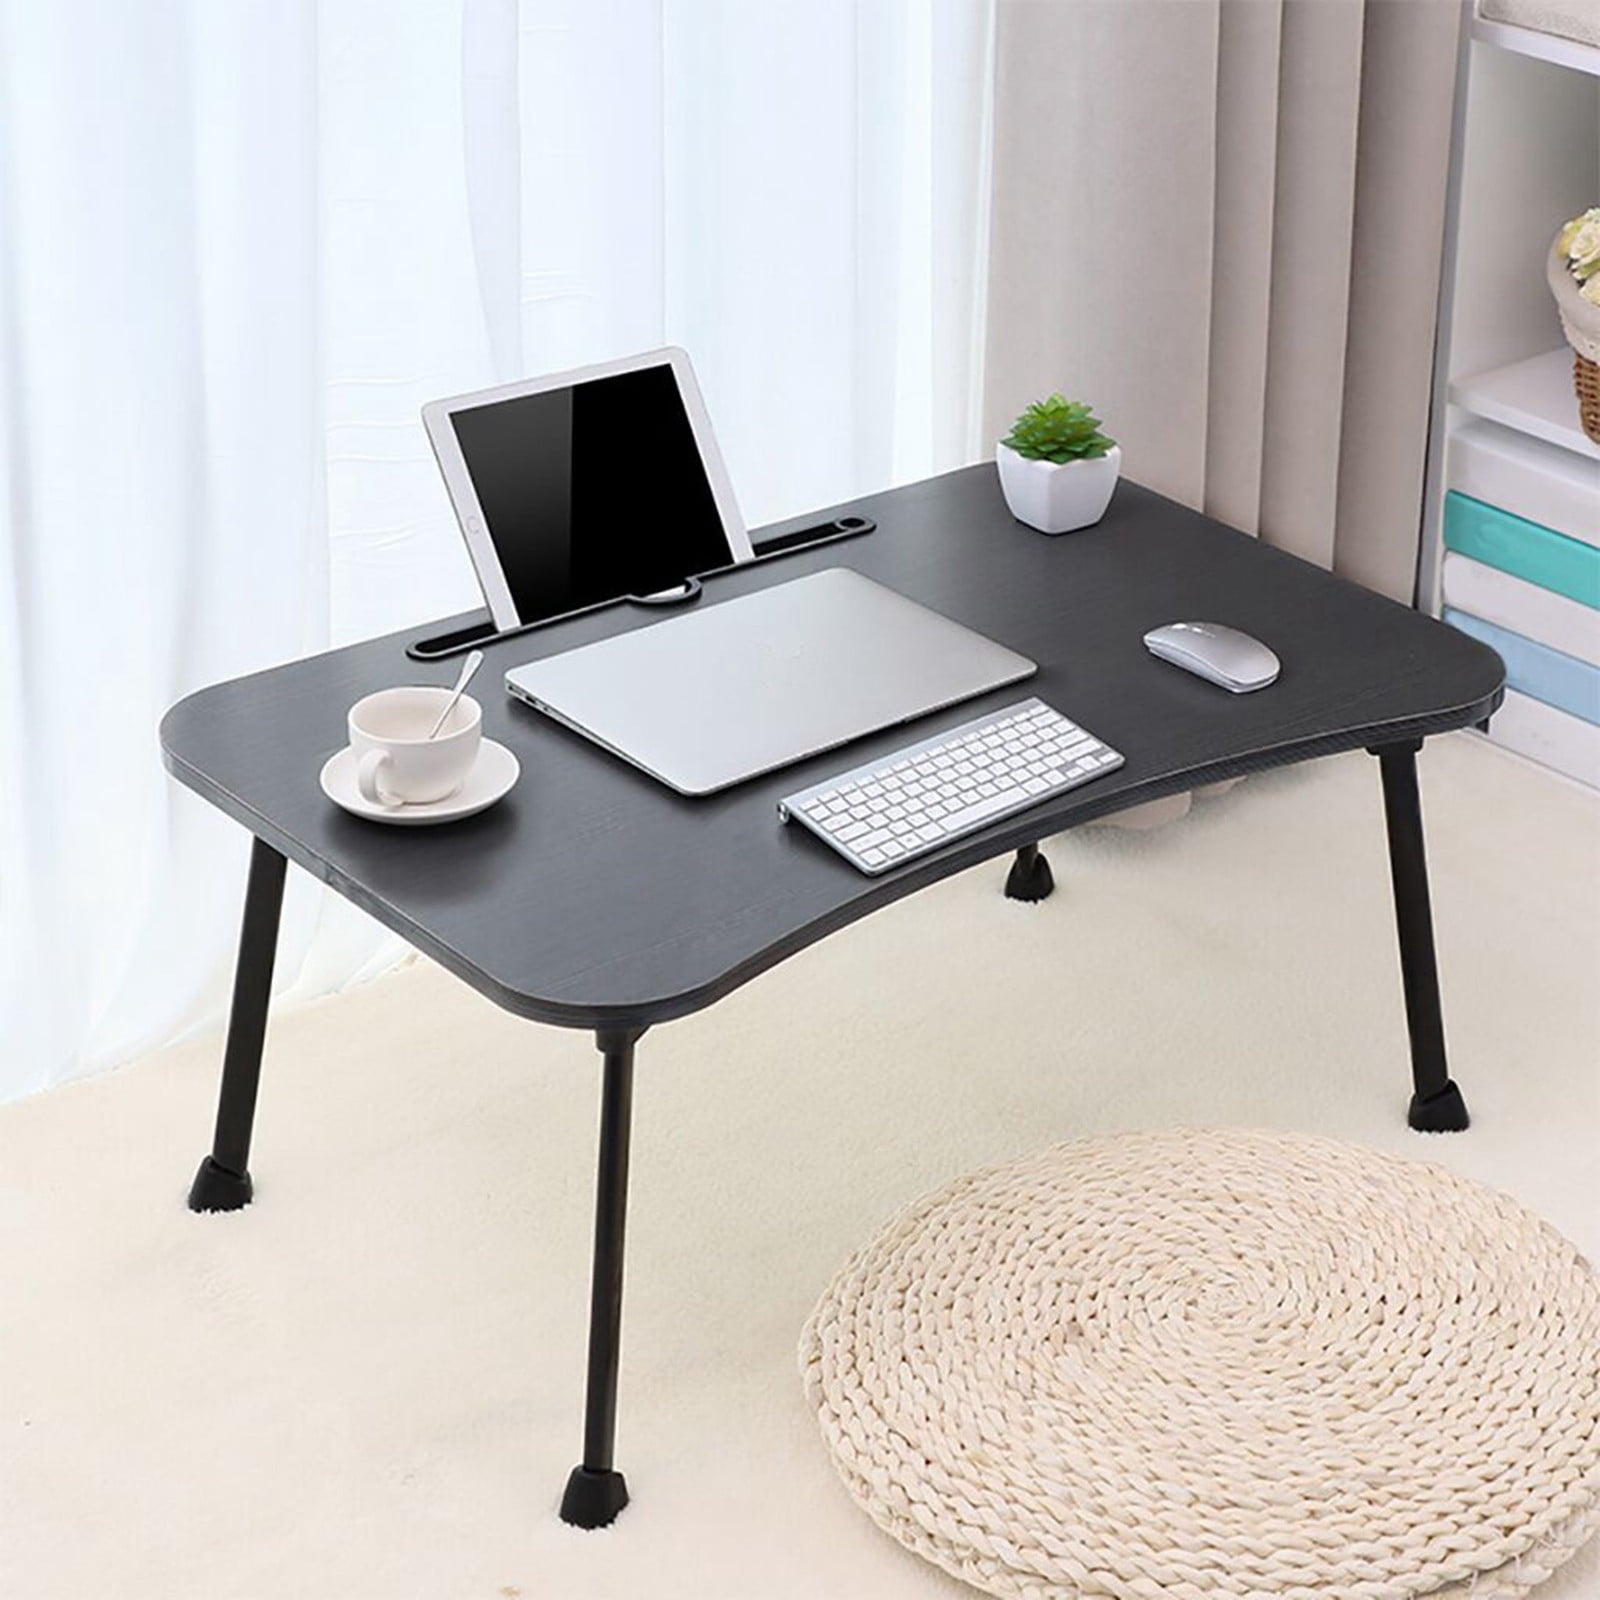 Details about   Folding Lazy Laptop Table Large Bed Tray Foldable Portable Multifunction BK 